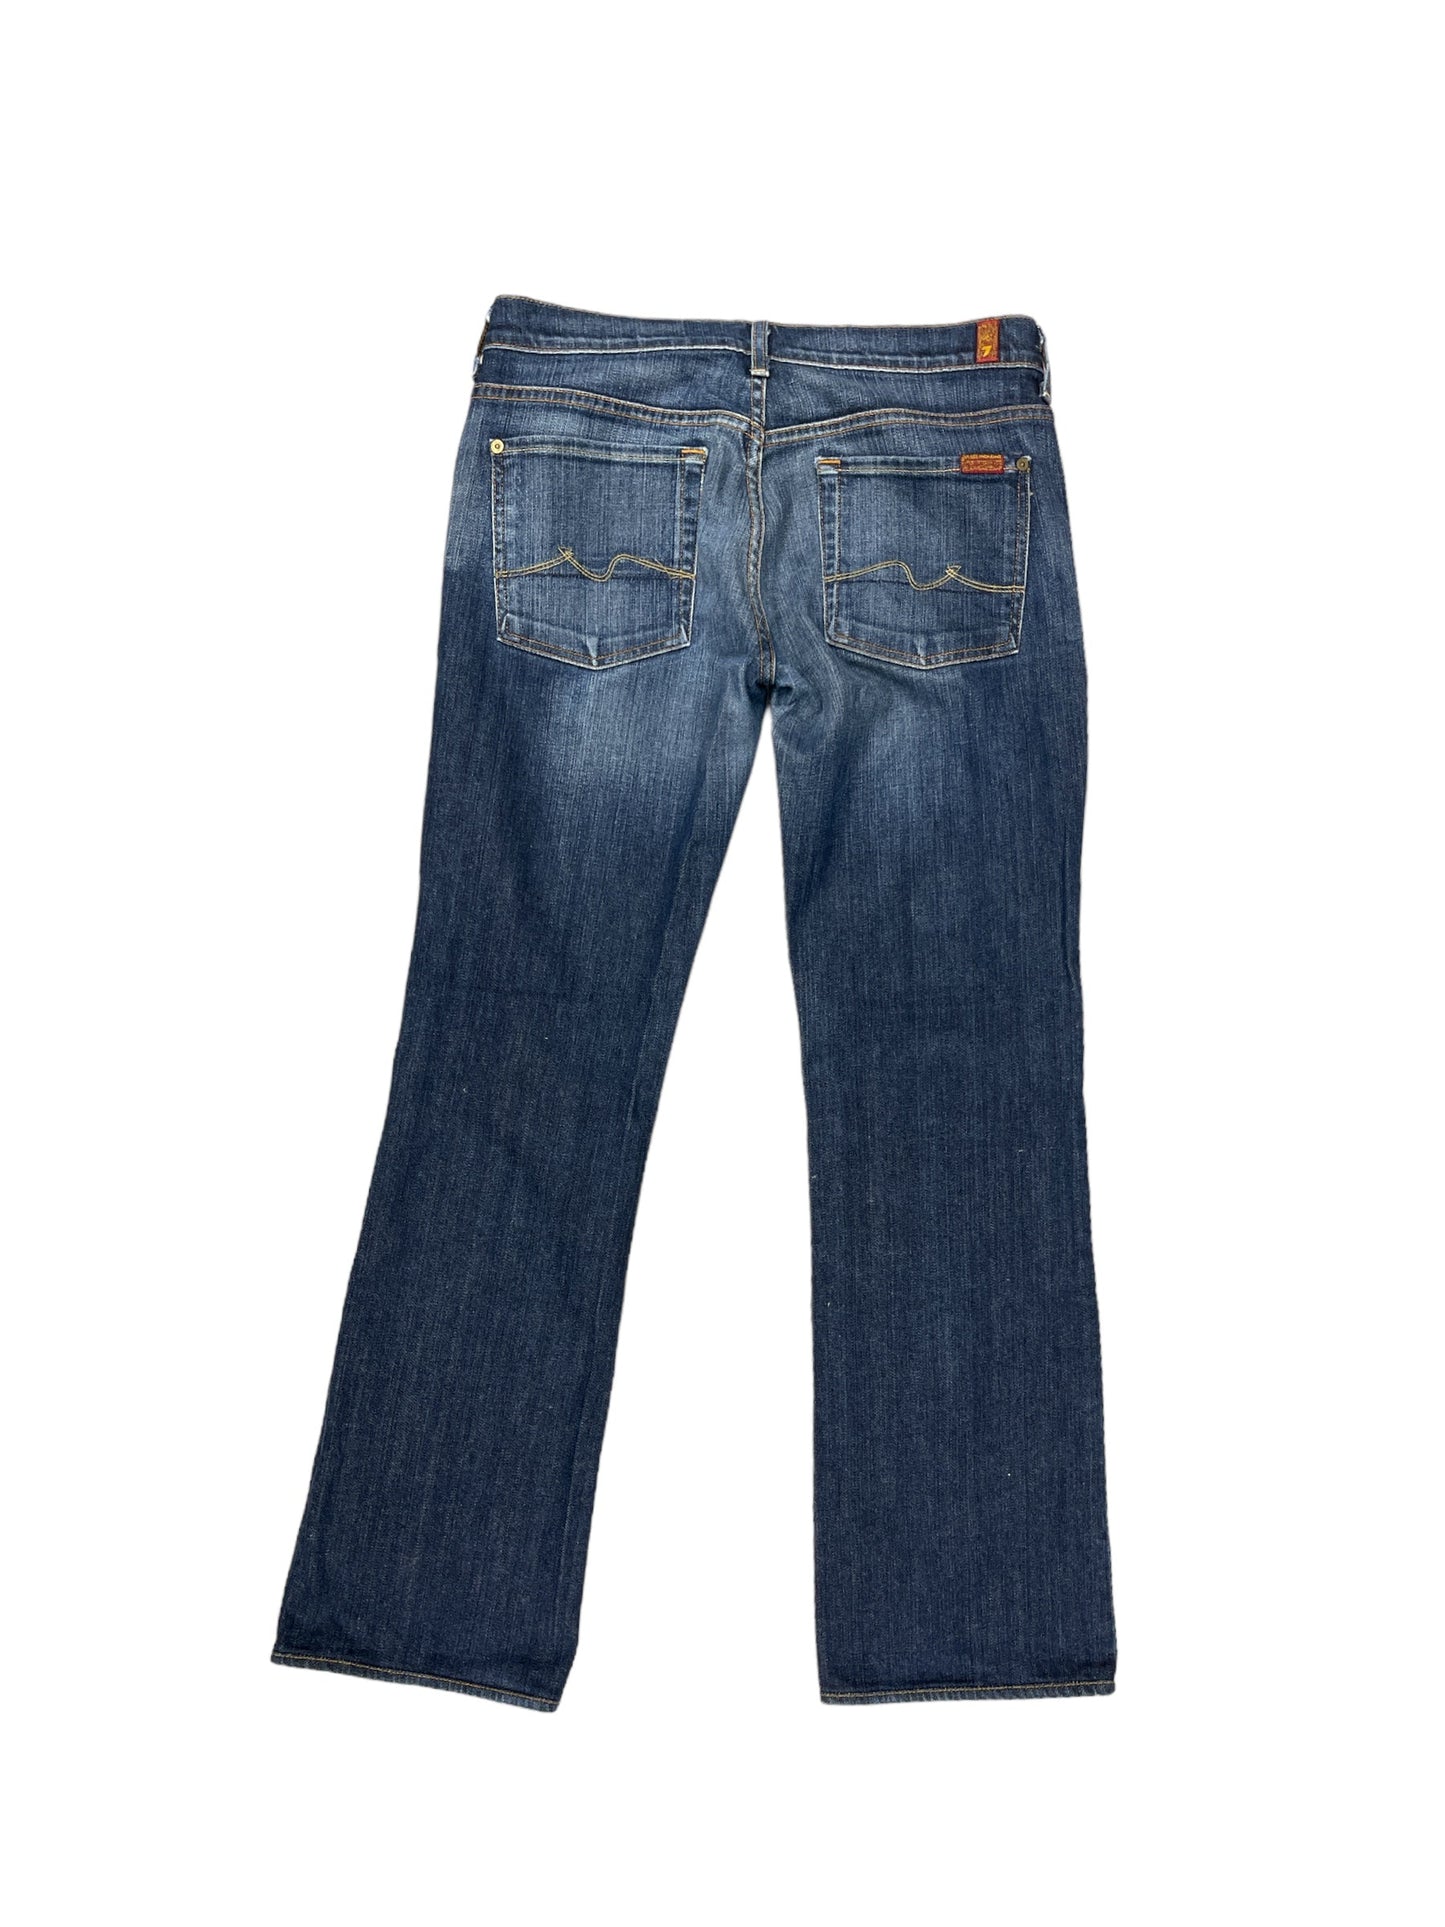 Jeans Boot Cut By 7 For All Mankind  Size: 31